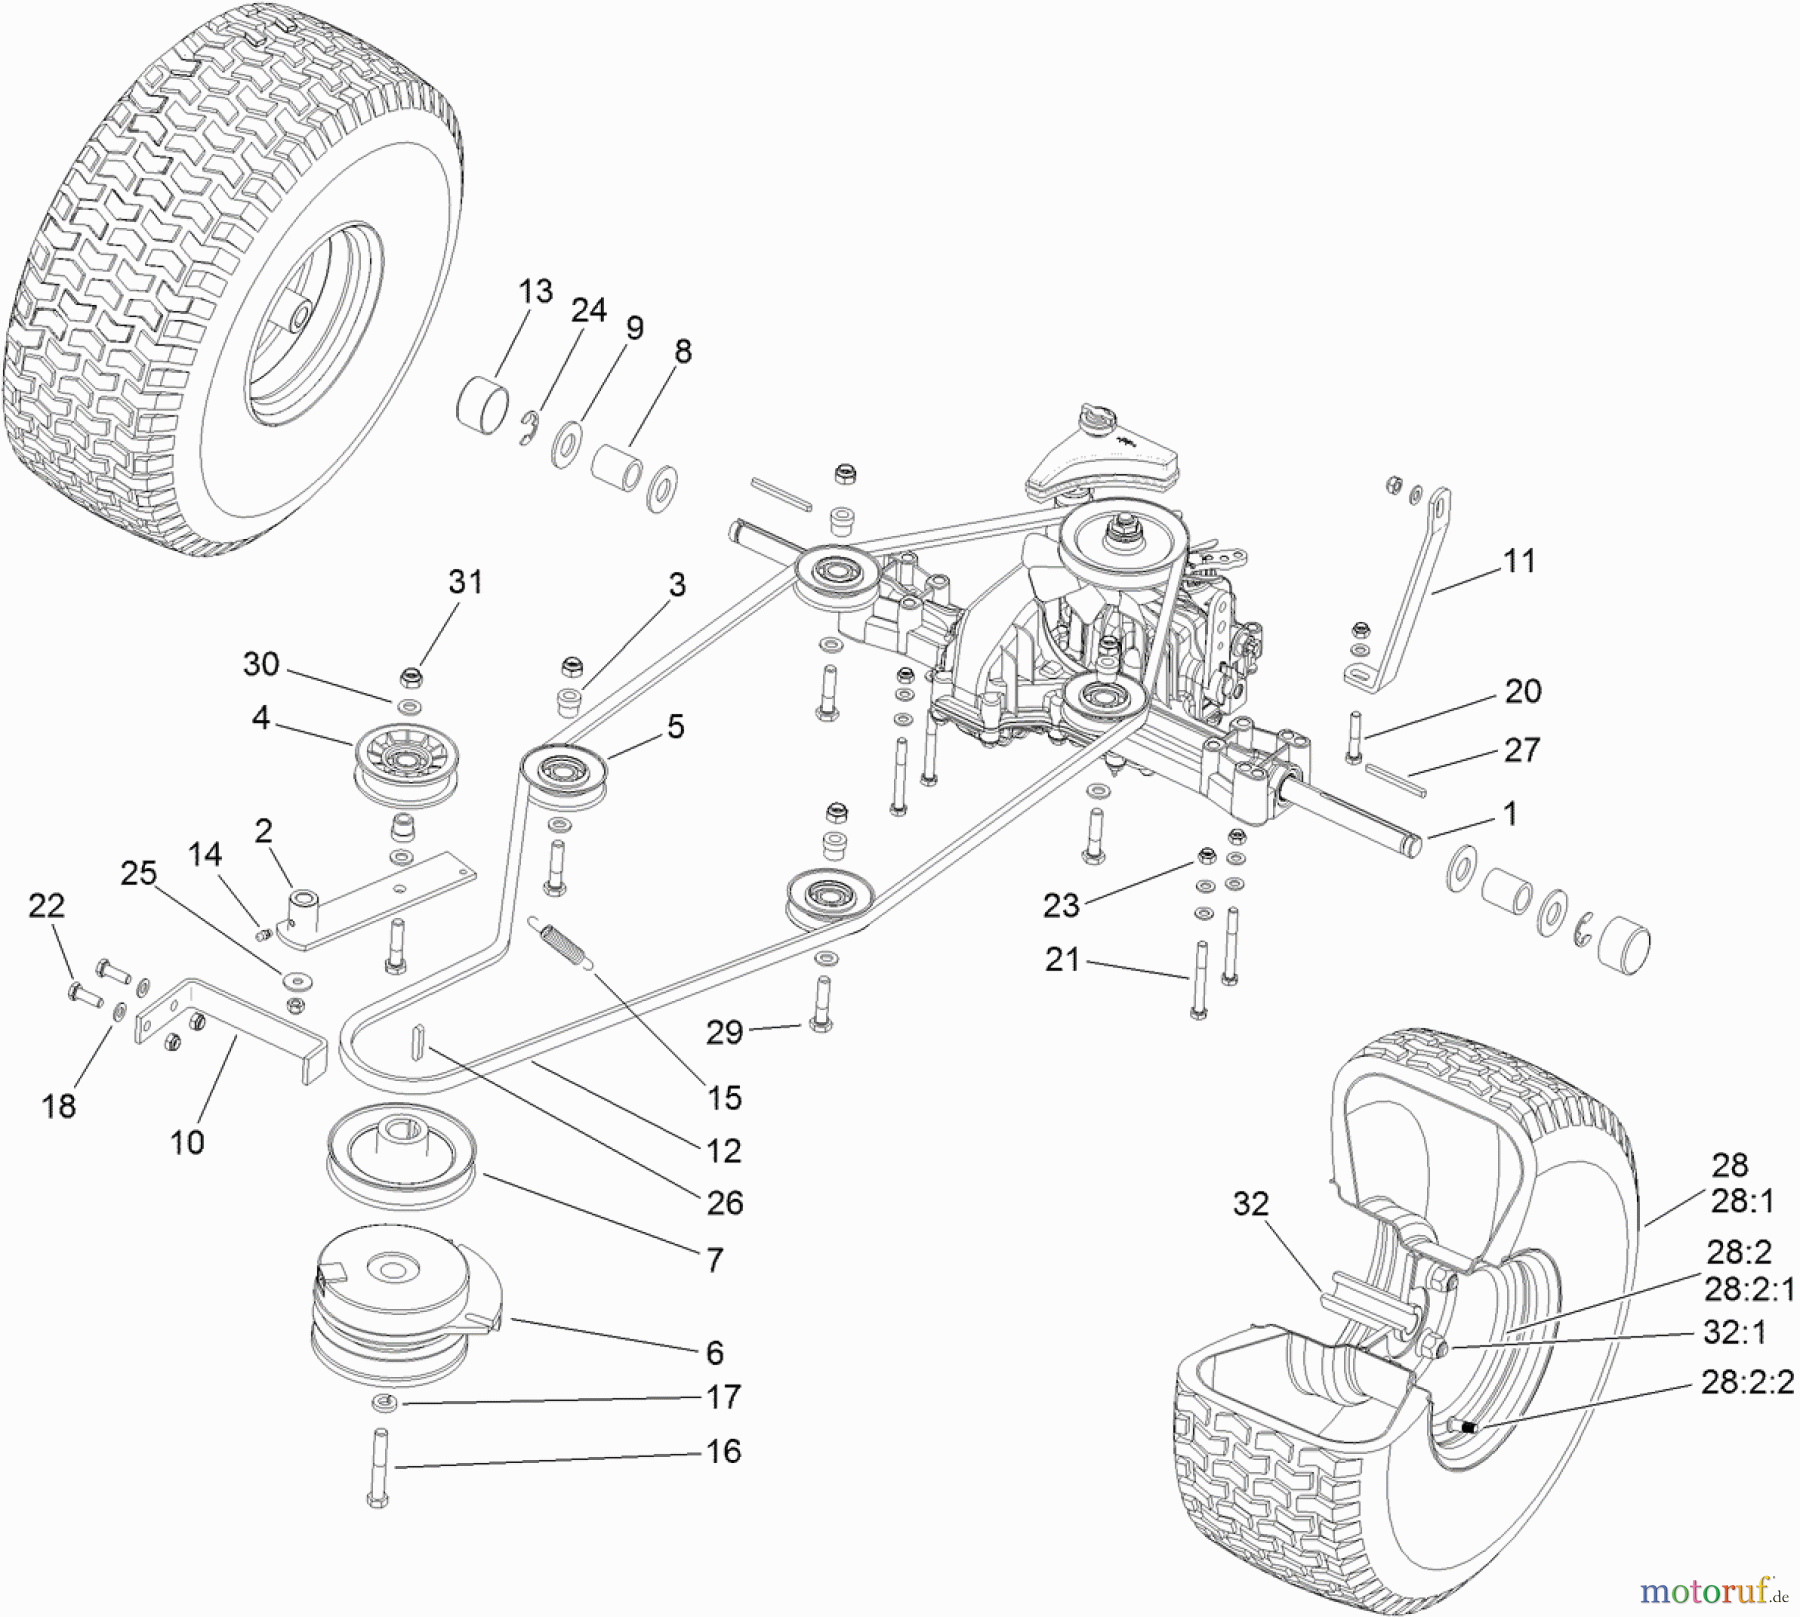  Toro Neu Mowers, Lawn & Garden Tractor Seite 1 74585 (DH 210) - Toro DH 210 Lawn Tractor, 2012 (SN 312000001-312999999) TRANSMISSION DRIVE ASSEMBLY